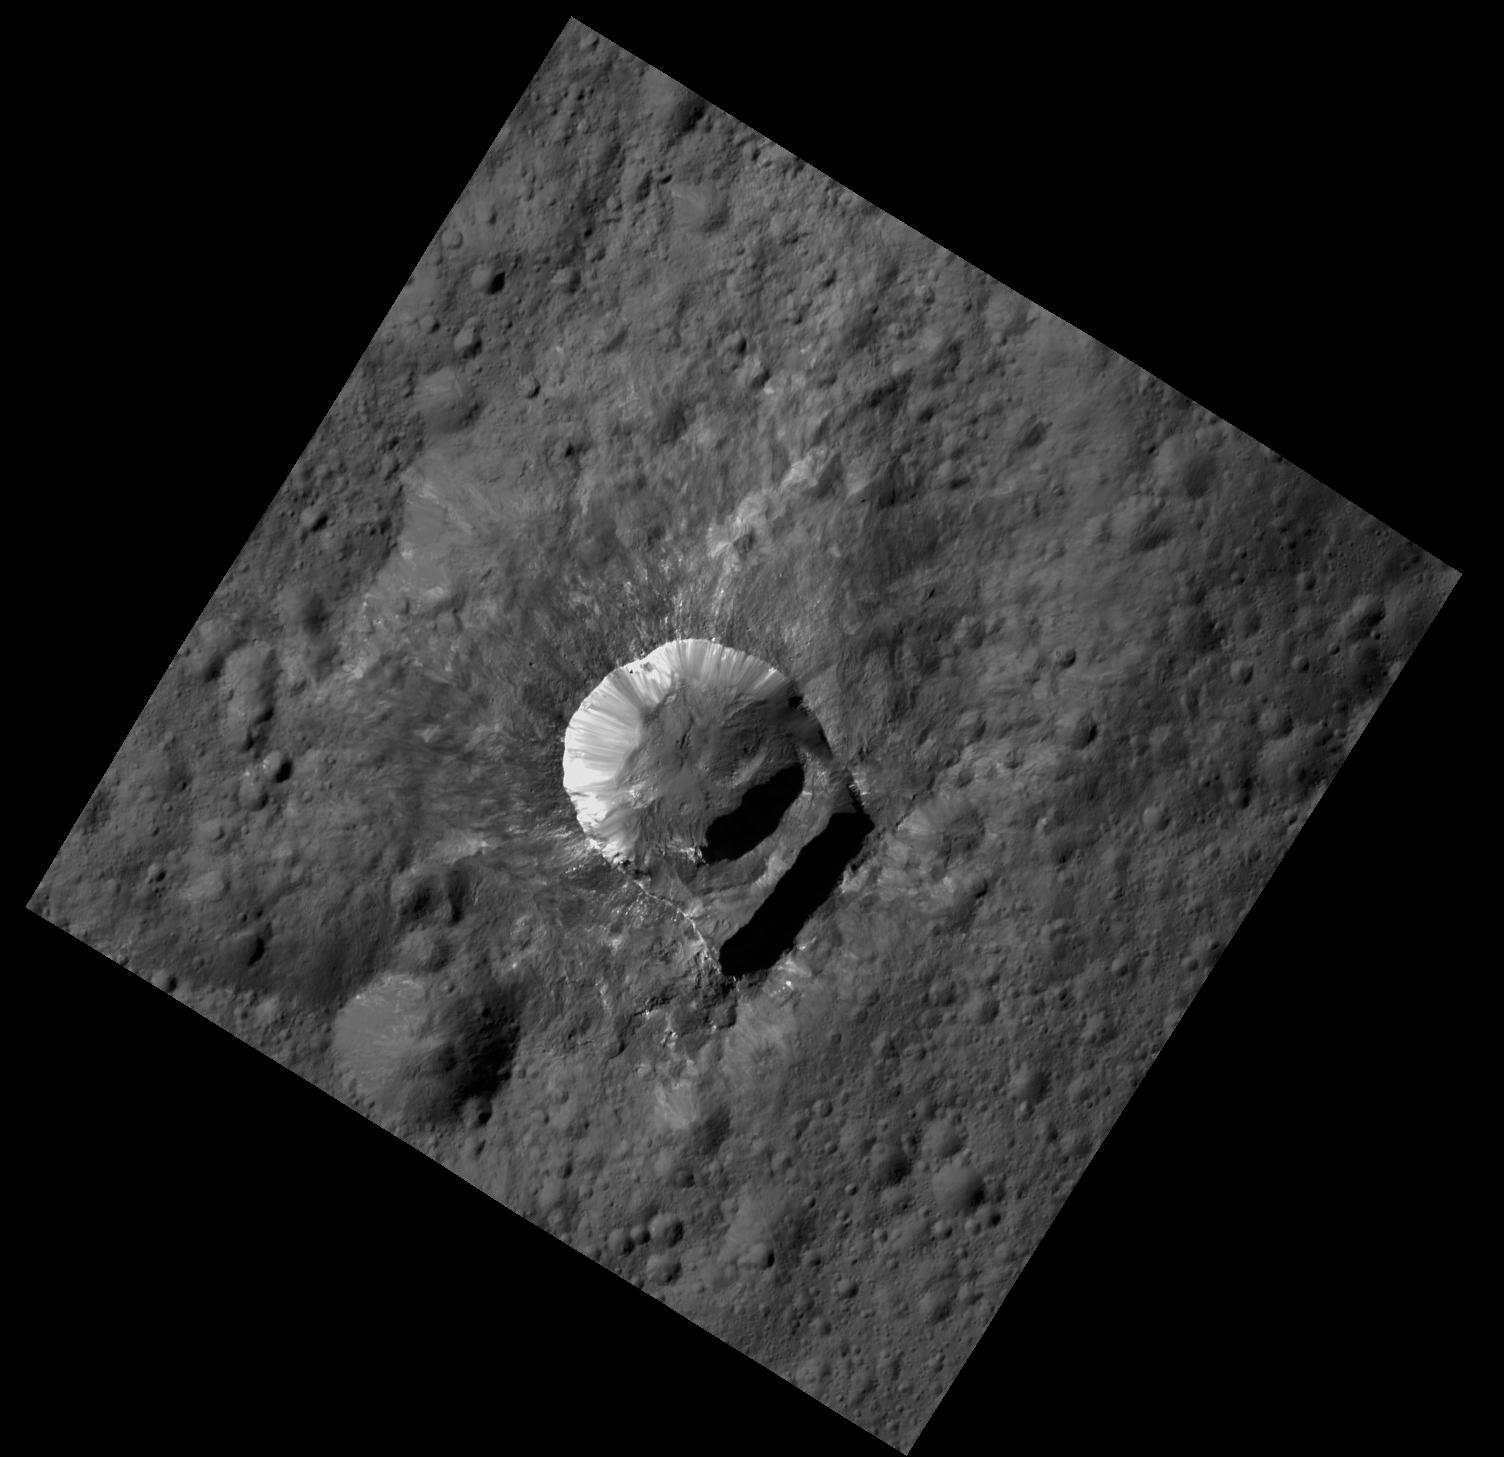 Oxo Crater on Ceres is unique because of the relatively large "slump" in its crater rim.  The 6-mile-wide (10-kilometer-wide) Oxo crater is the second-brightest feature on Ceres.  Credits: NASA/JPL-Caltech/UCLA/MPS/DLR/IDA/PSI